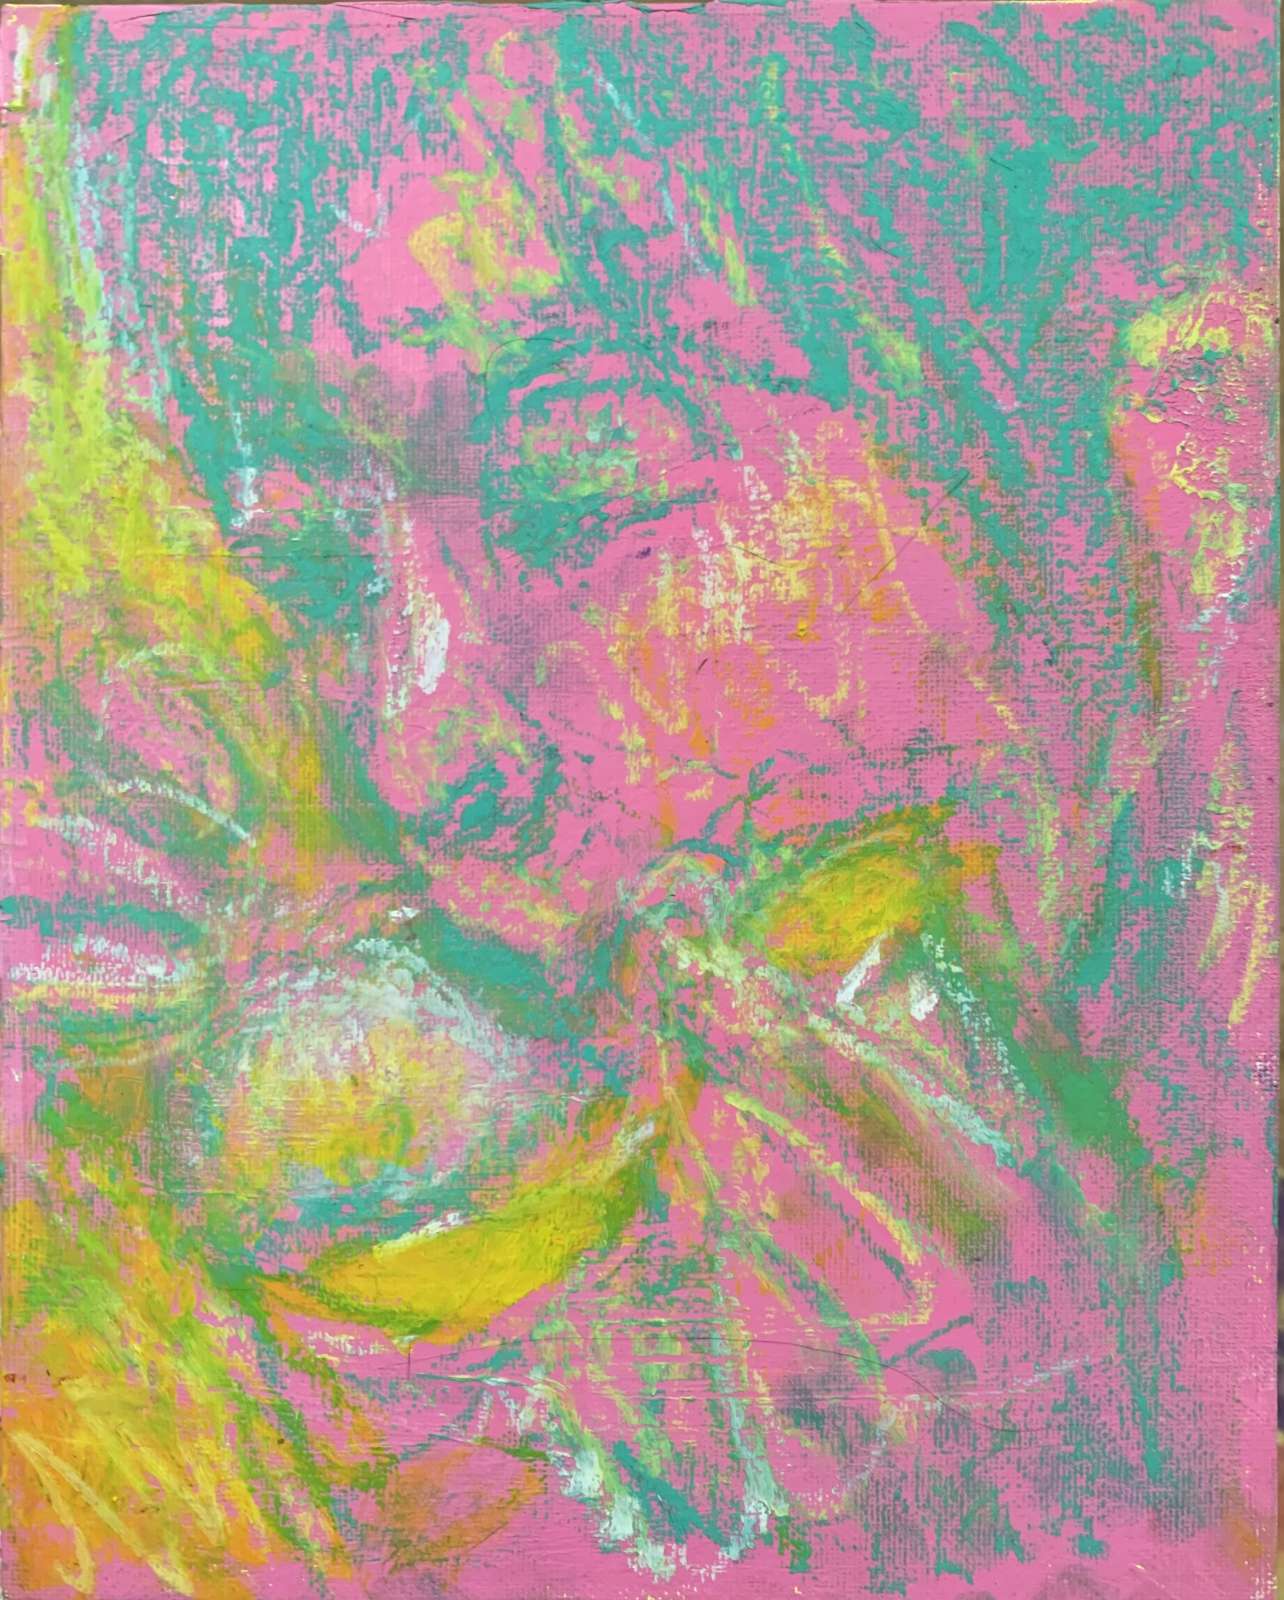 Caroline Wong, Hungry Woman 4, 2022, Acrylic, oil, and oil pastel on canvas board, 20.3 x 25.4 cm